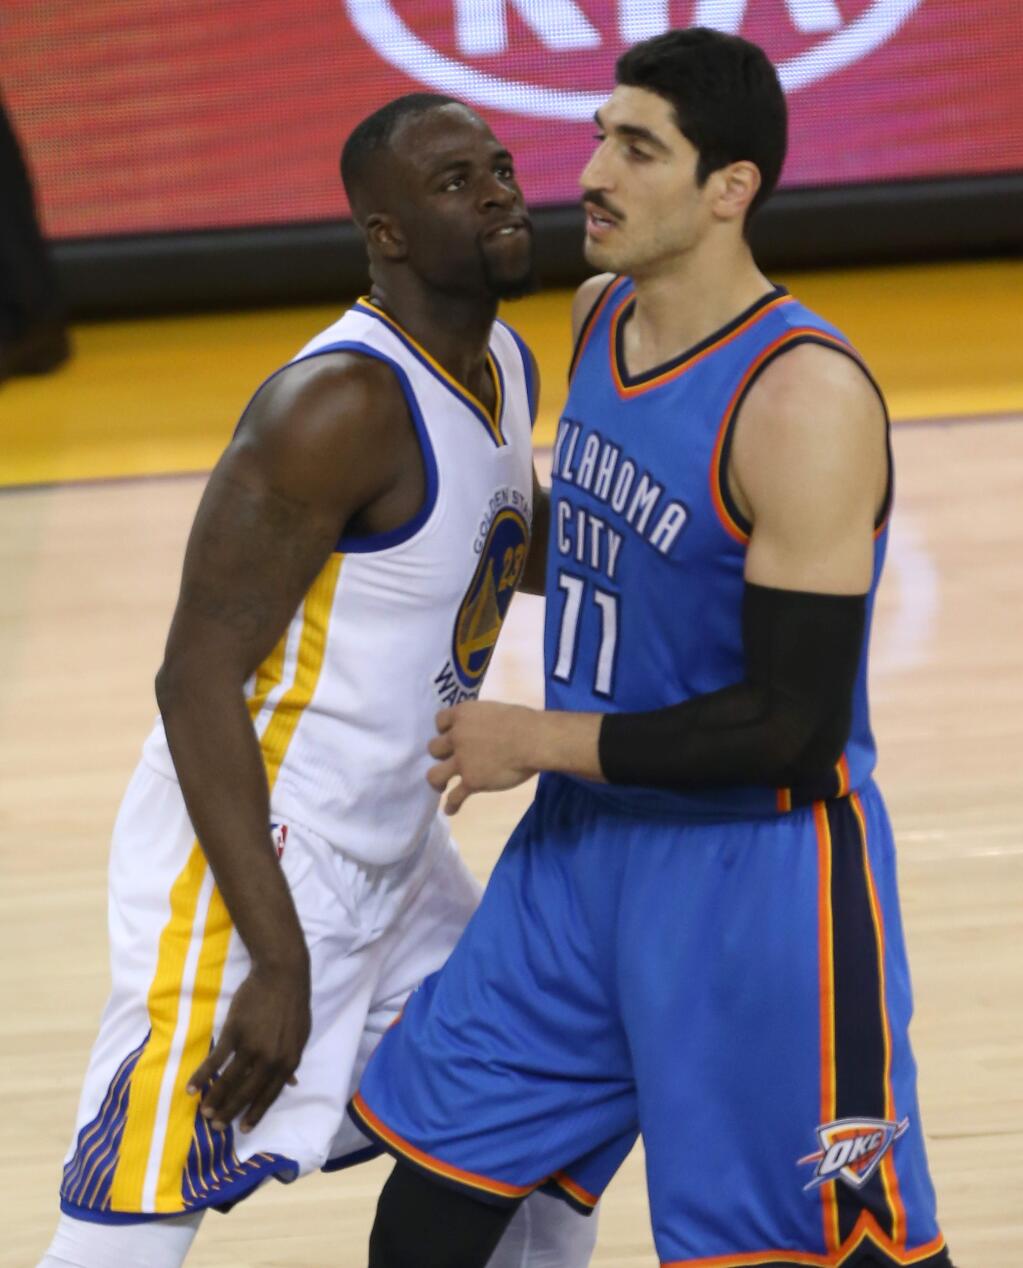 Golden State Warriors' Draymond Green stares down Oklahoma City Thunder's Enes Kanter after scoring, during their game in Oakland on Wednesday, May 18, 2016. The Warriors defeated the Thunder 118-91.(Christopher Chung/ The Press Democrat)